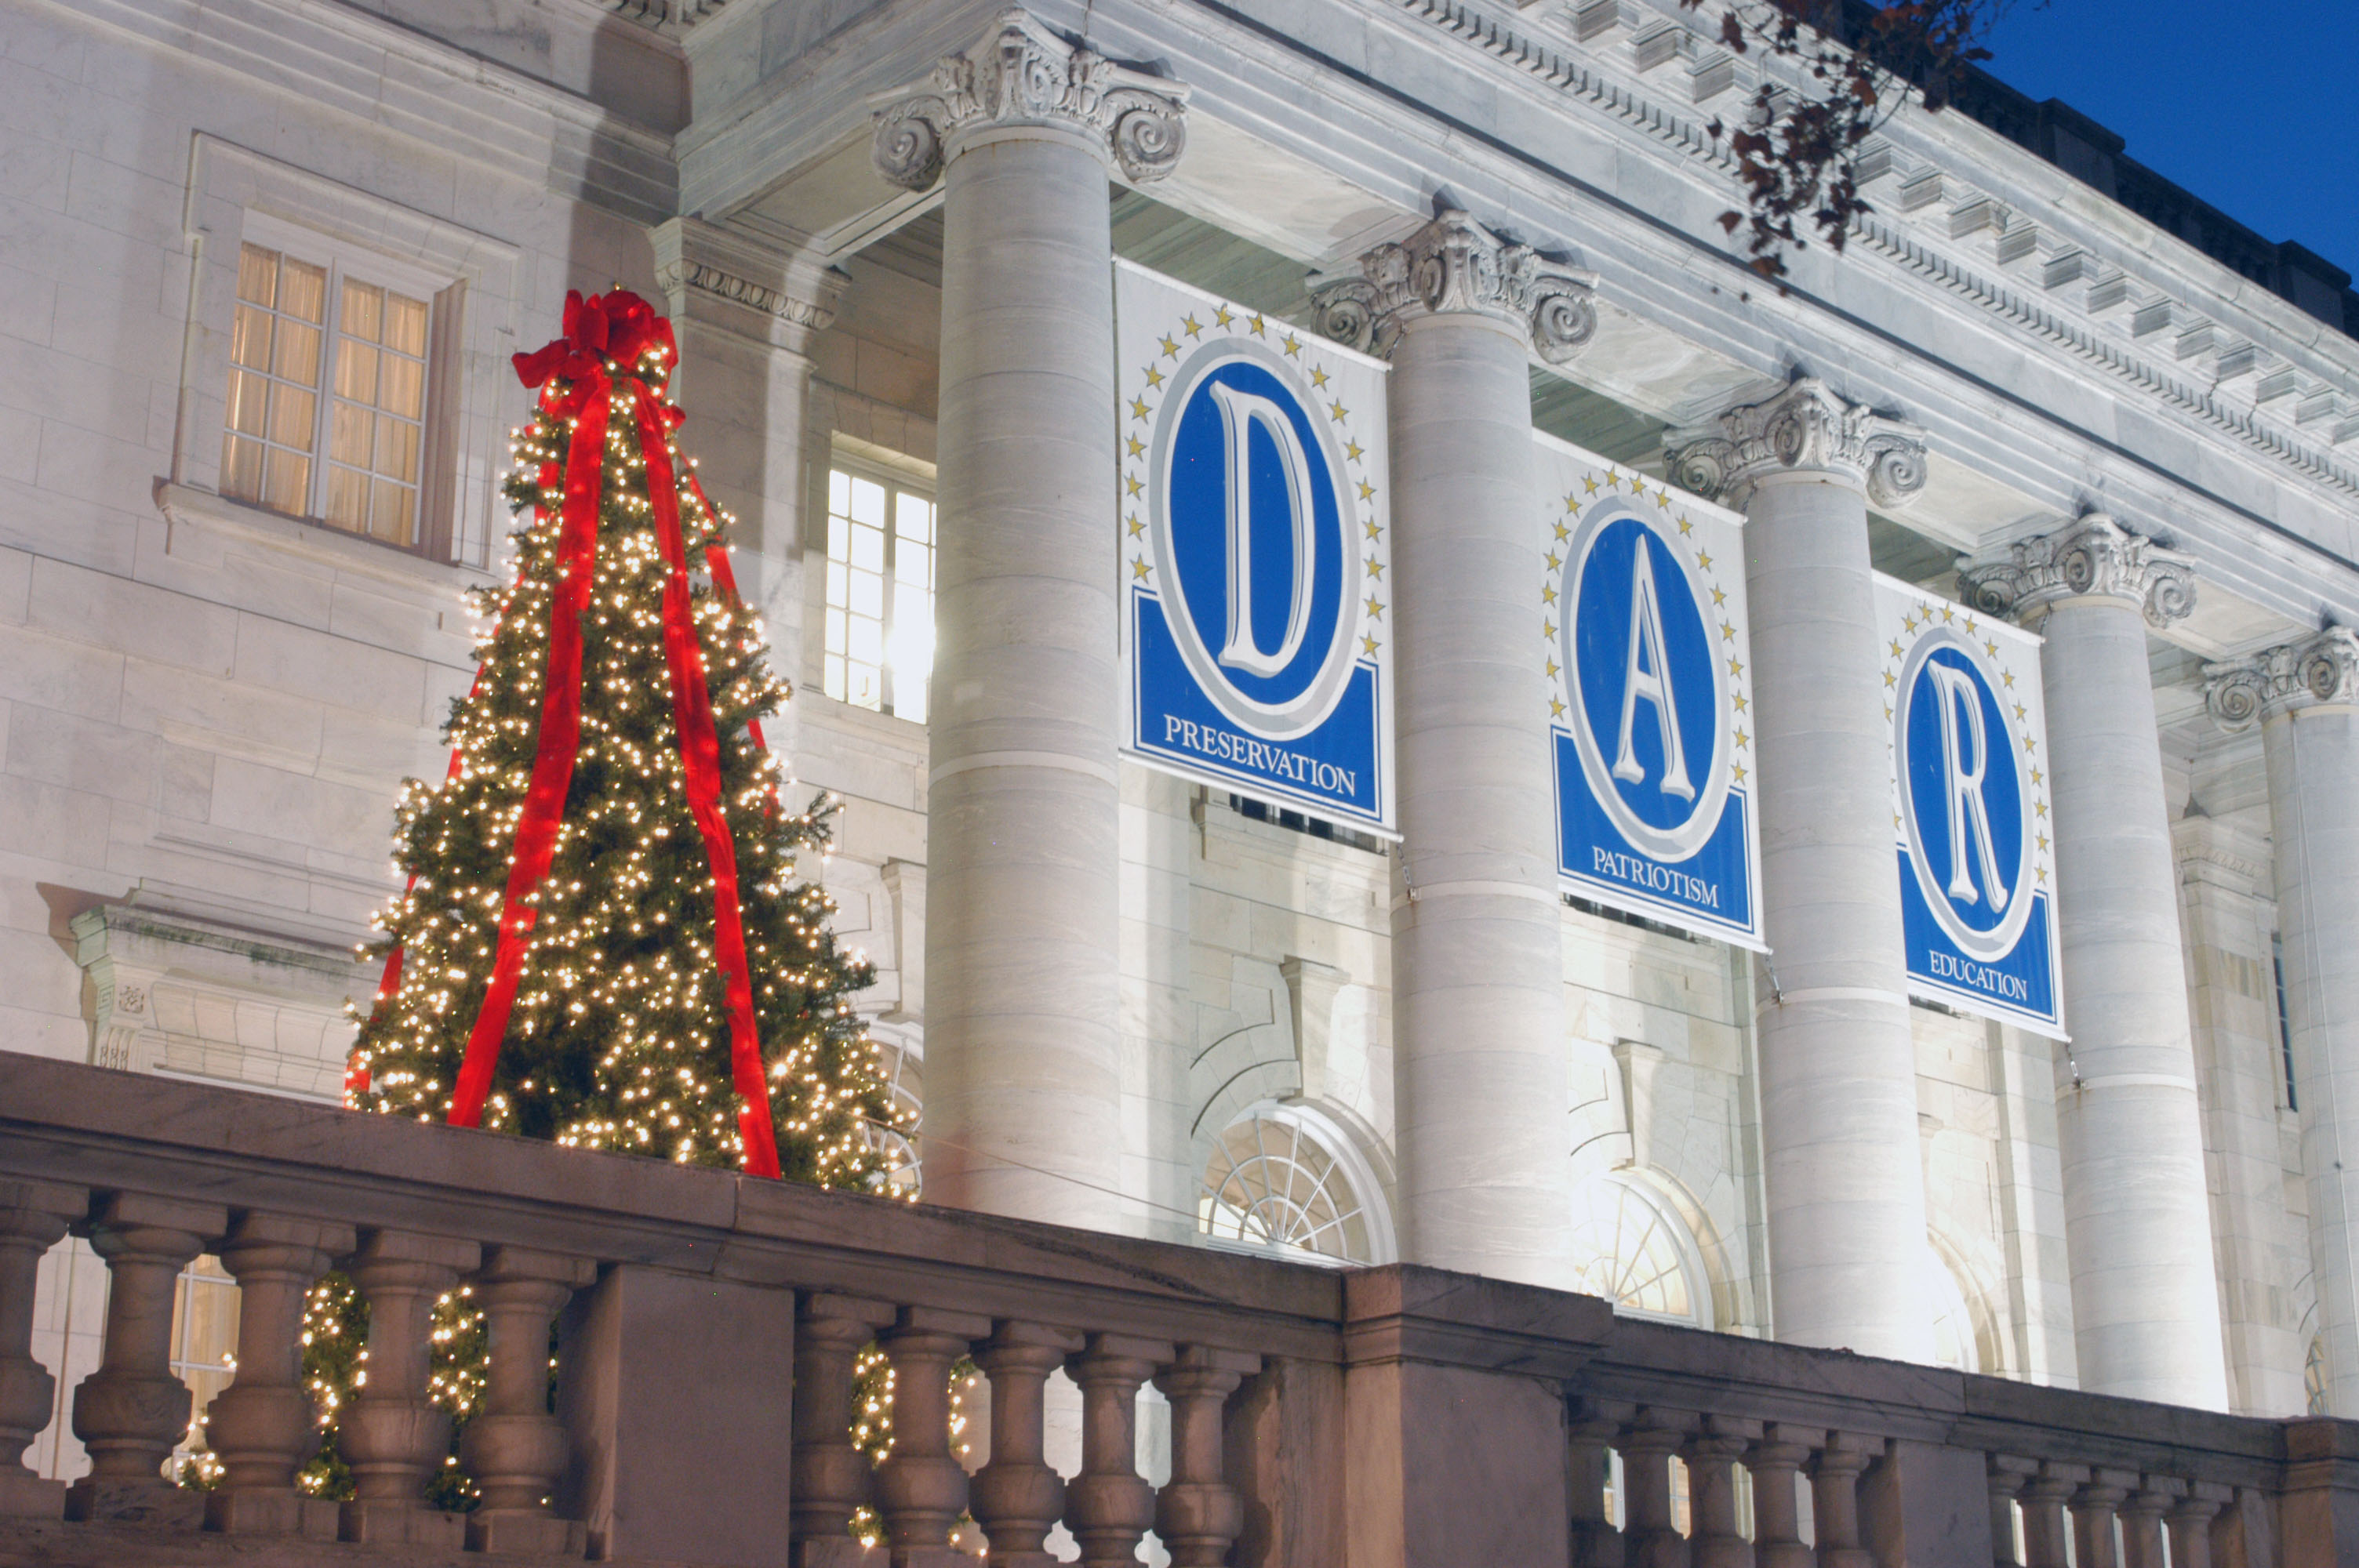 DAR Building with banners and a festive Christmas tree with a red bow on top. 